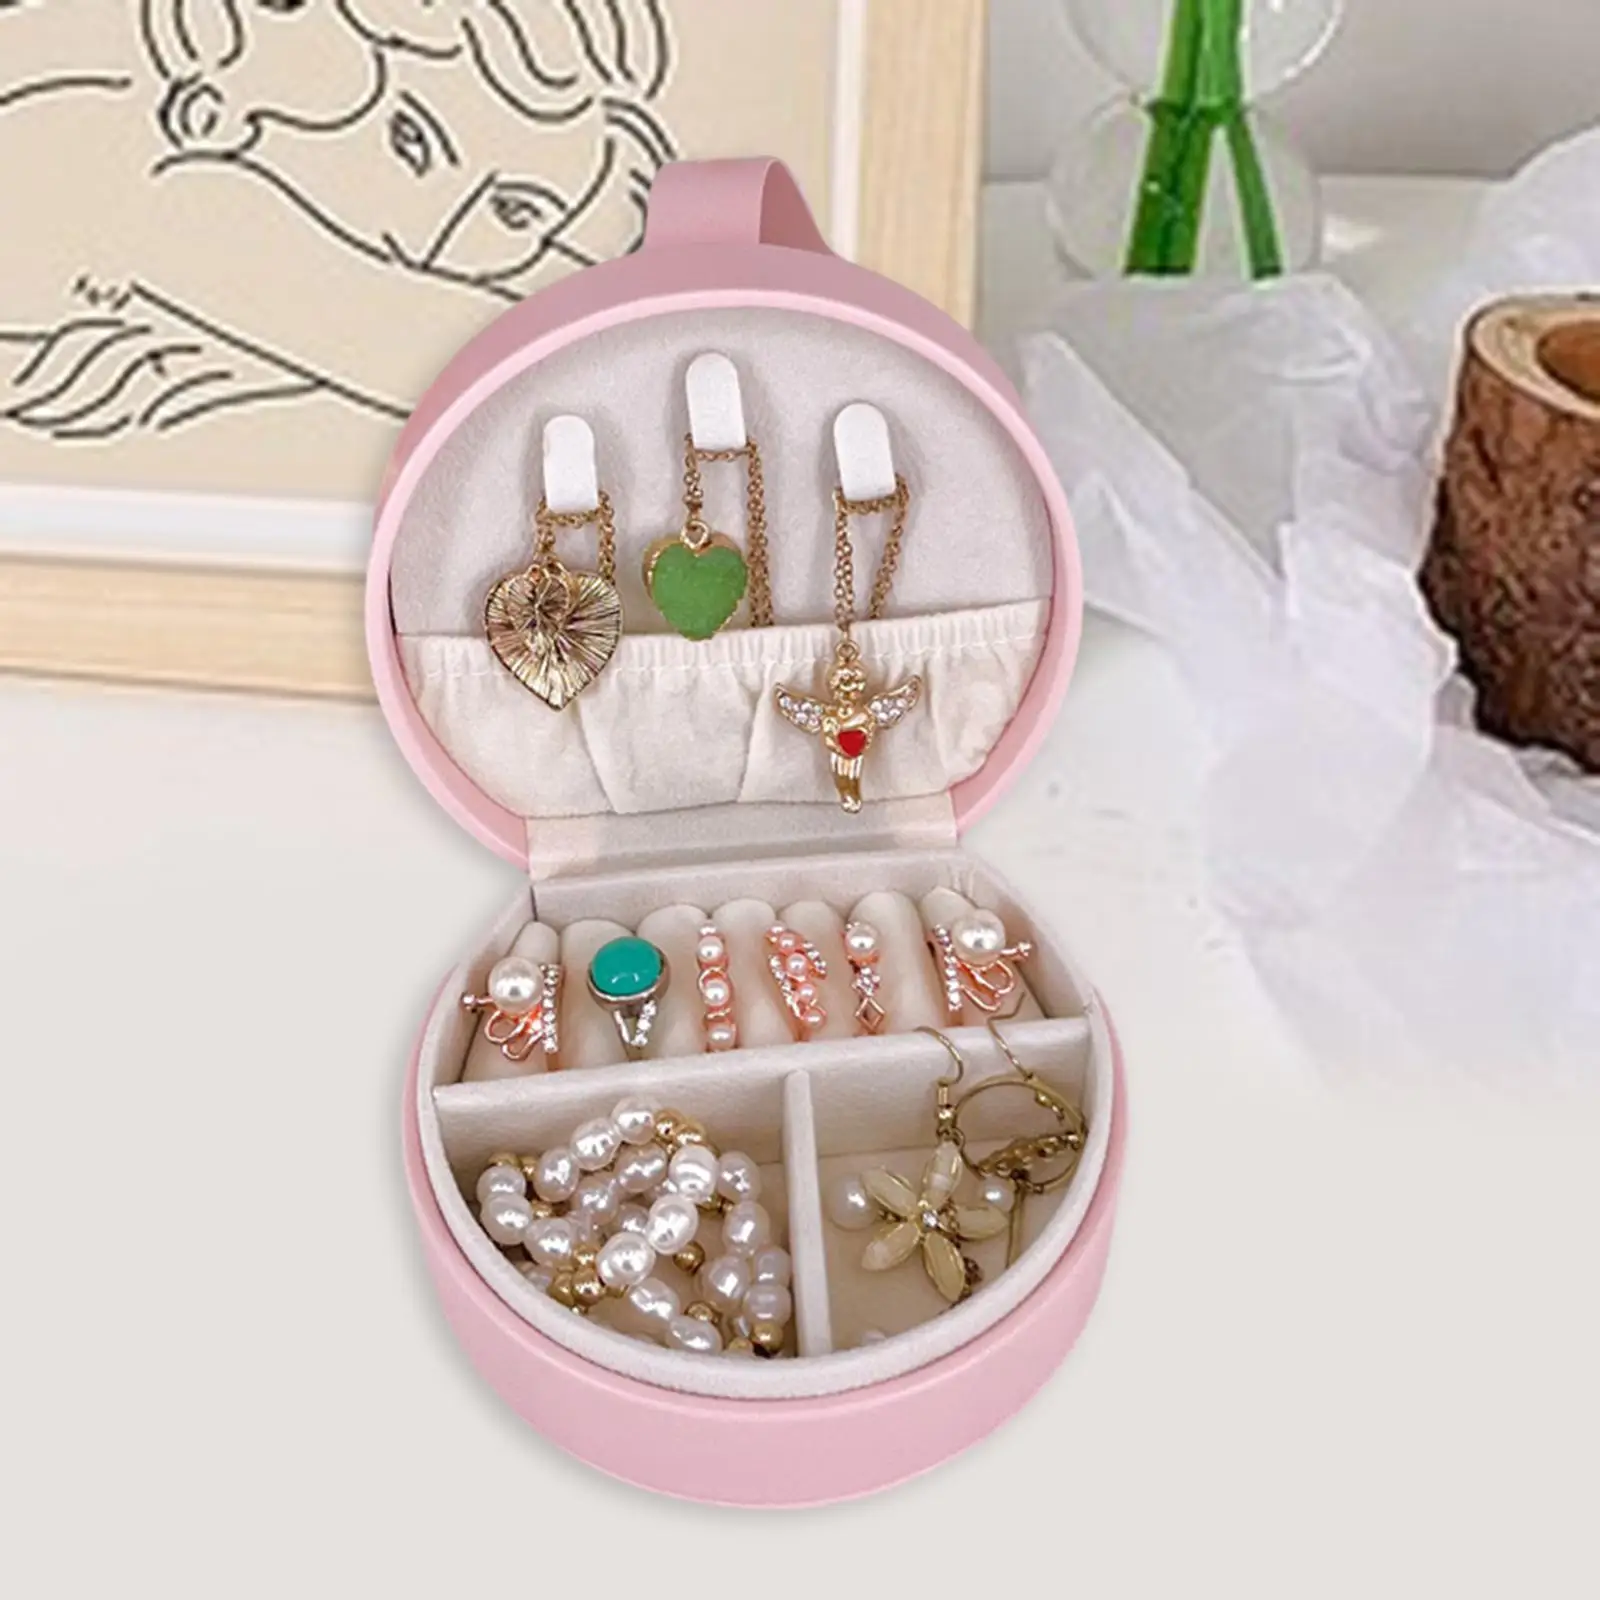 Jewelry Bag Removable Divider Jewelry Storage Organizer for Dorm Lady Shops